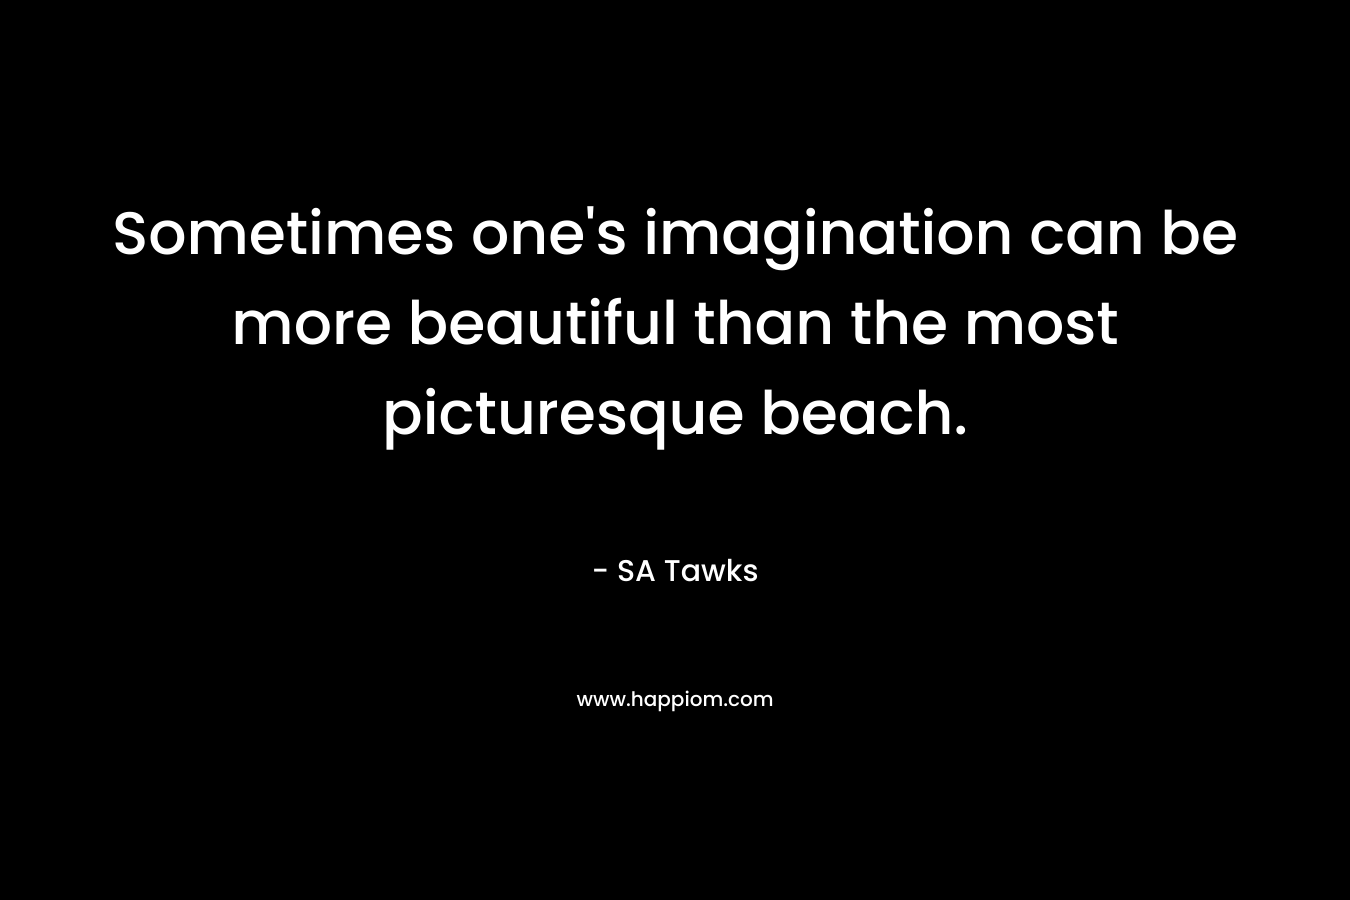 Sometimes one's imagination can be more beautiful than the most picturesque beach.